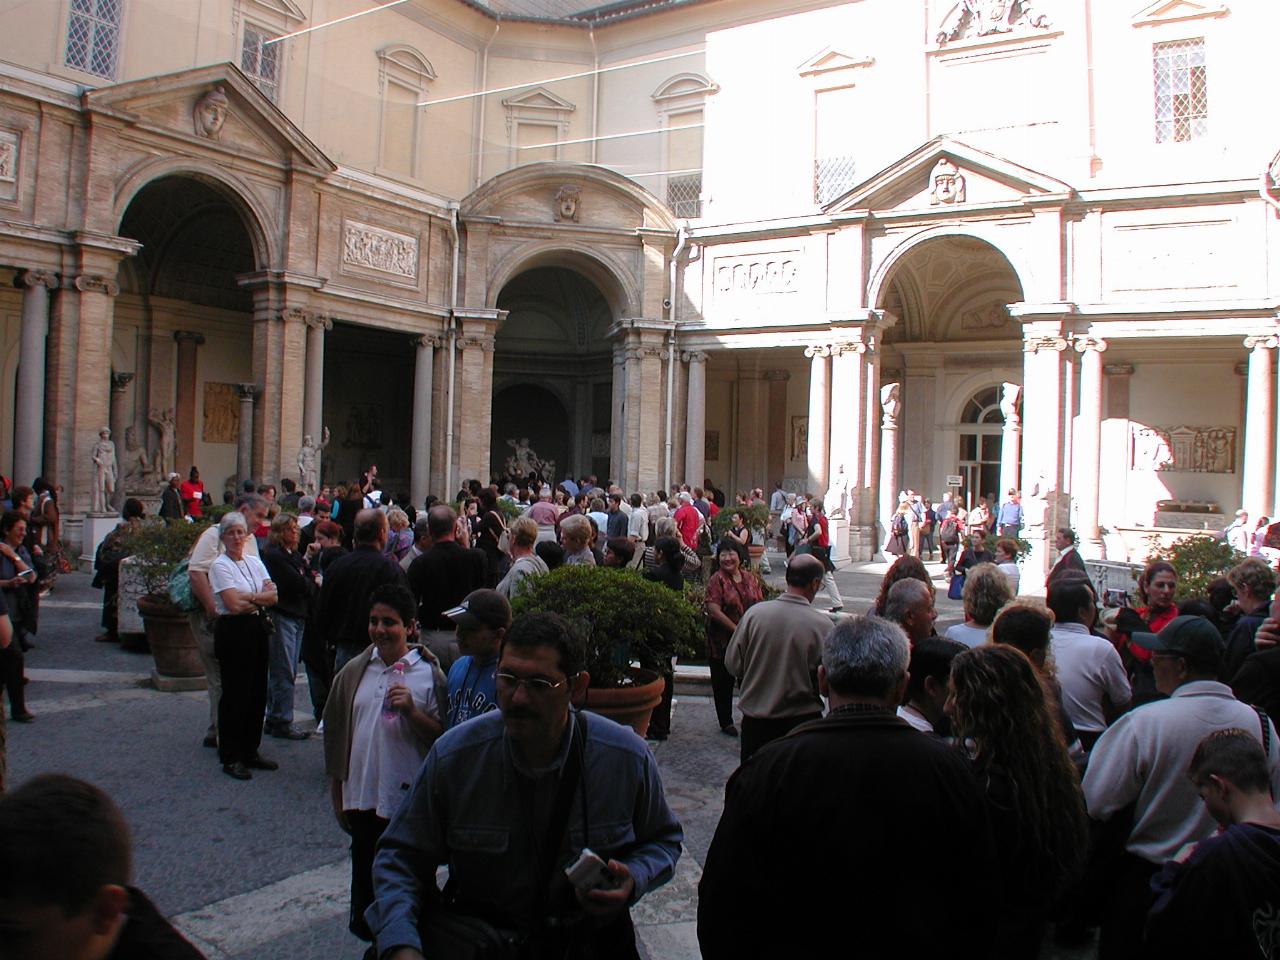 Vatican Museum Courtyard, with group N in the middle